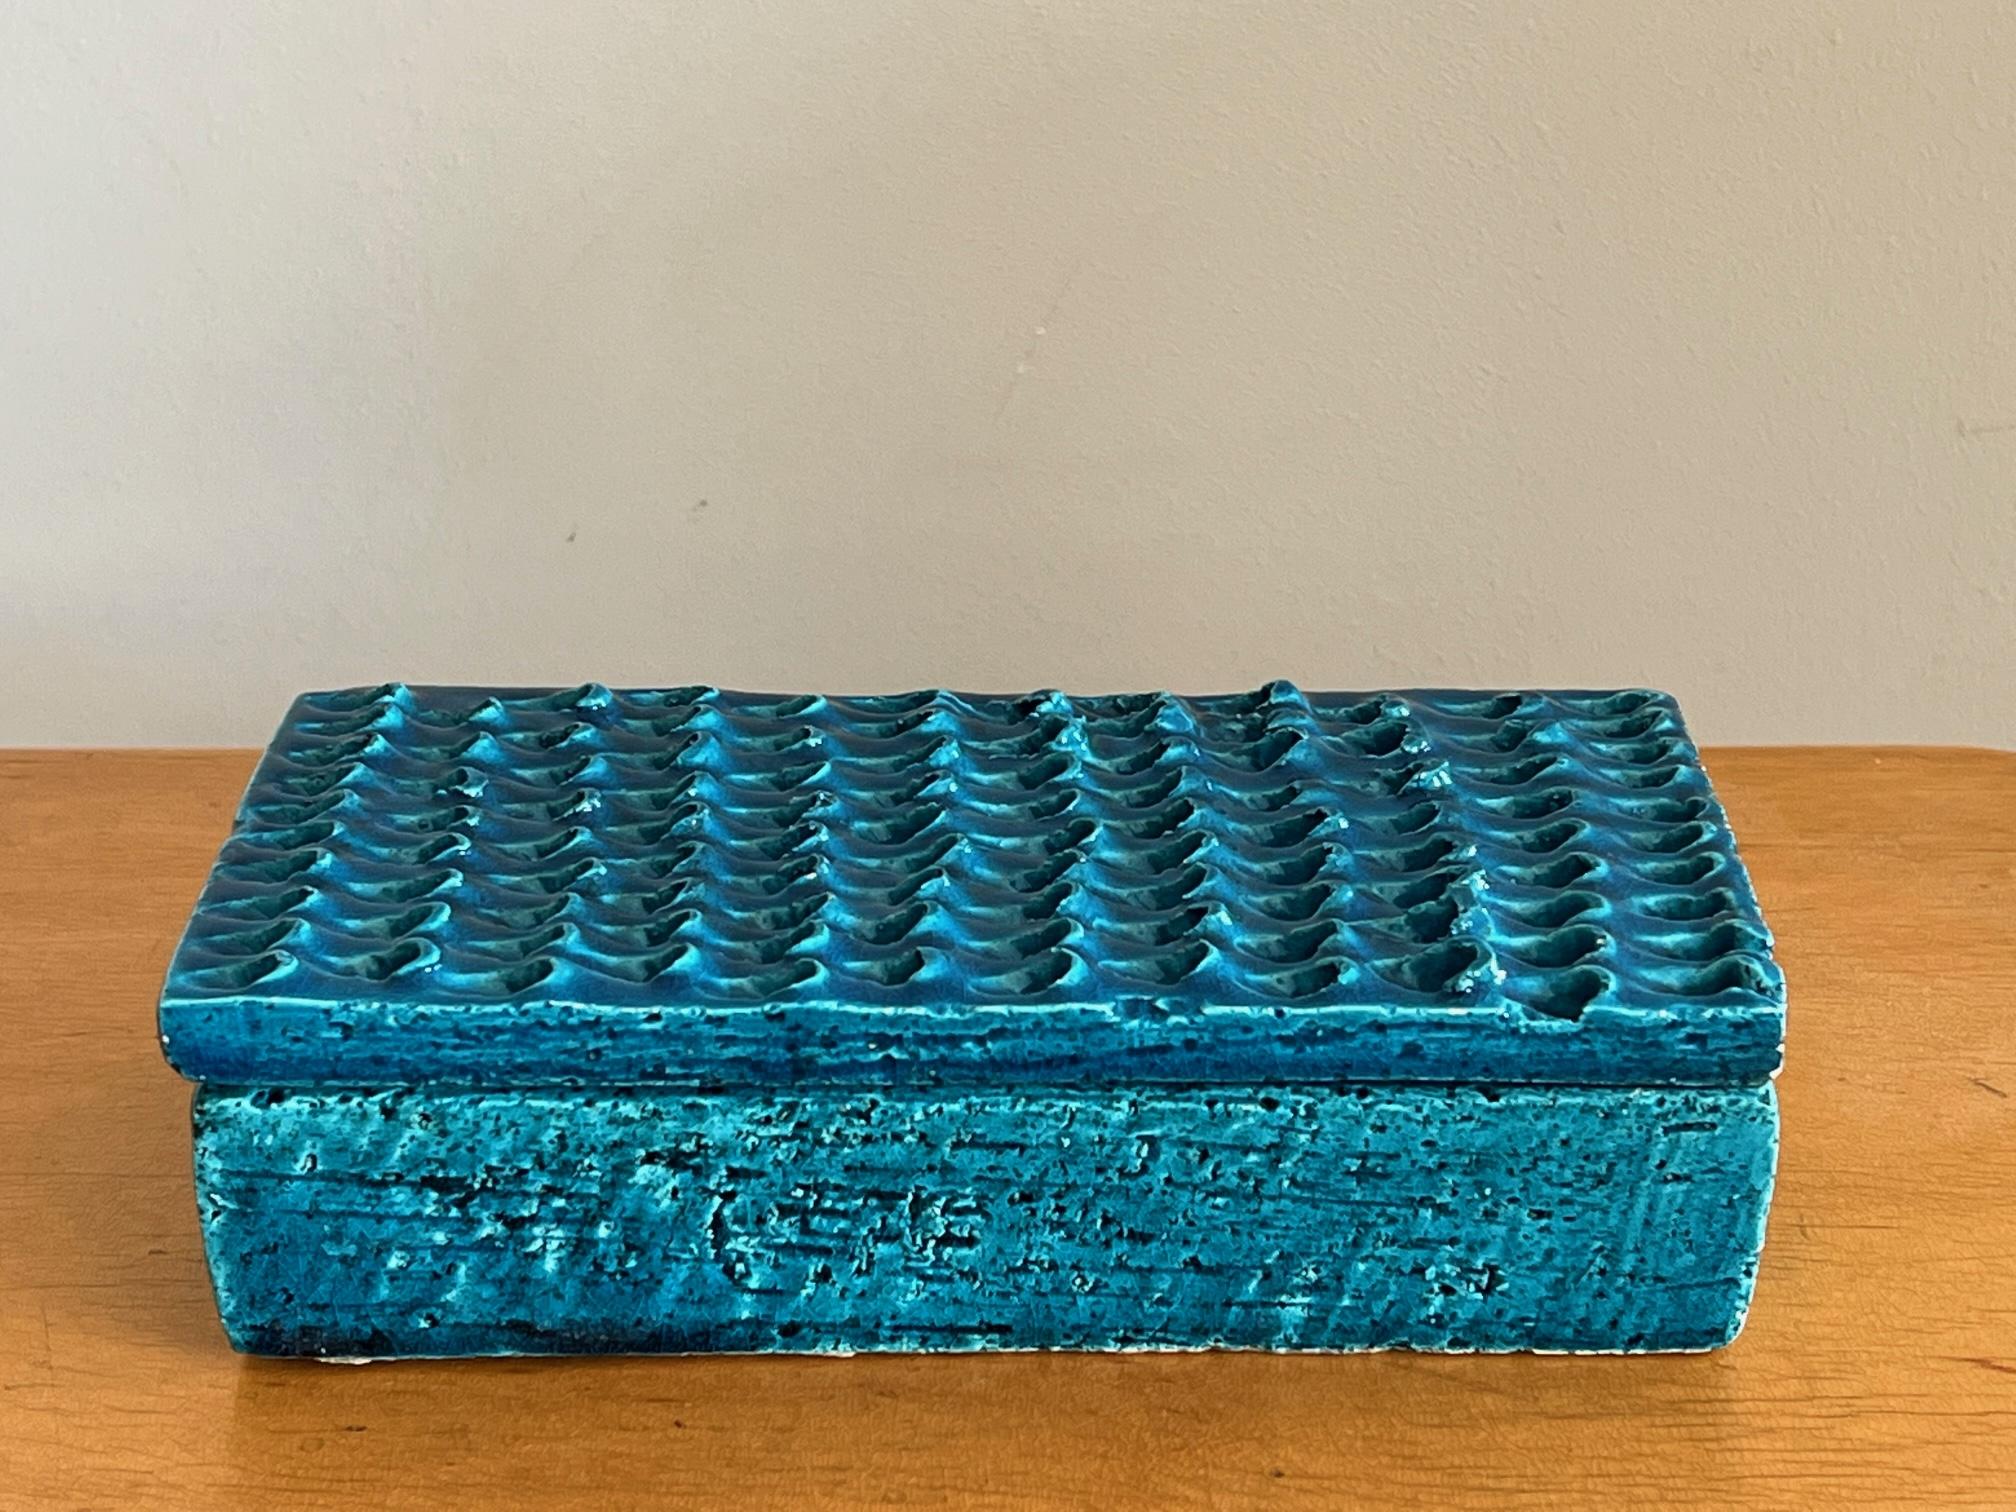 A beautiful Bitossi box-Rimini in turquoise color like the ocean with rich wavy texture.